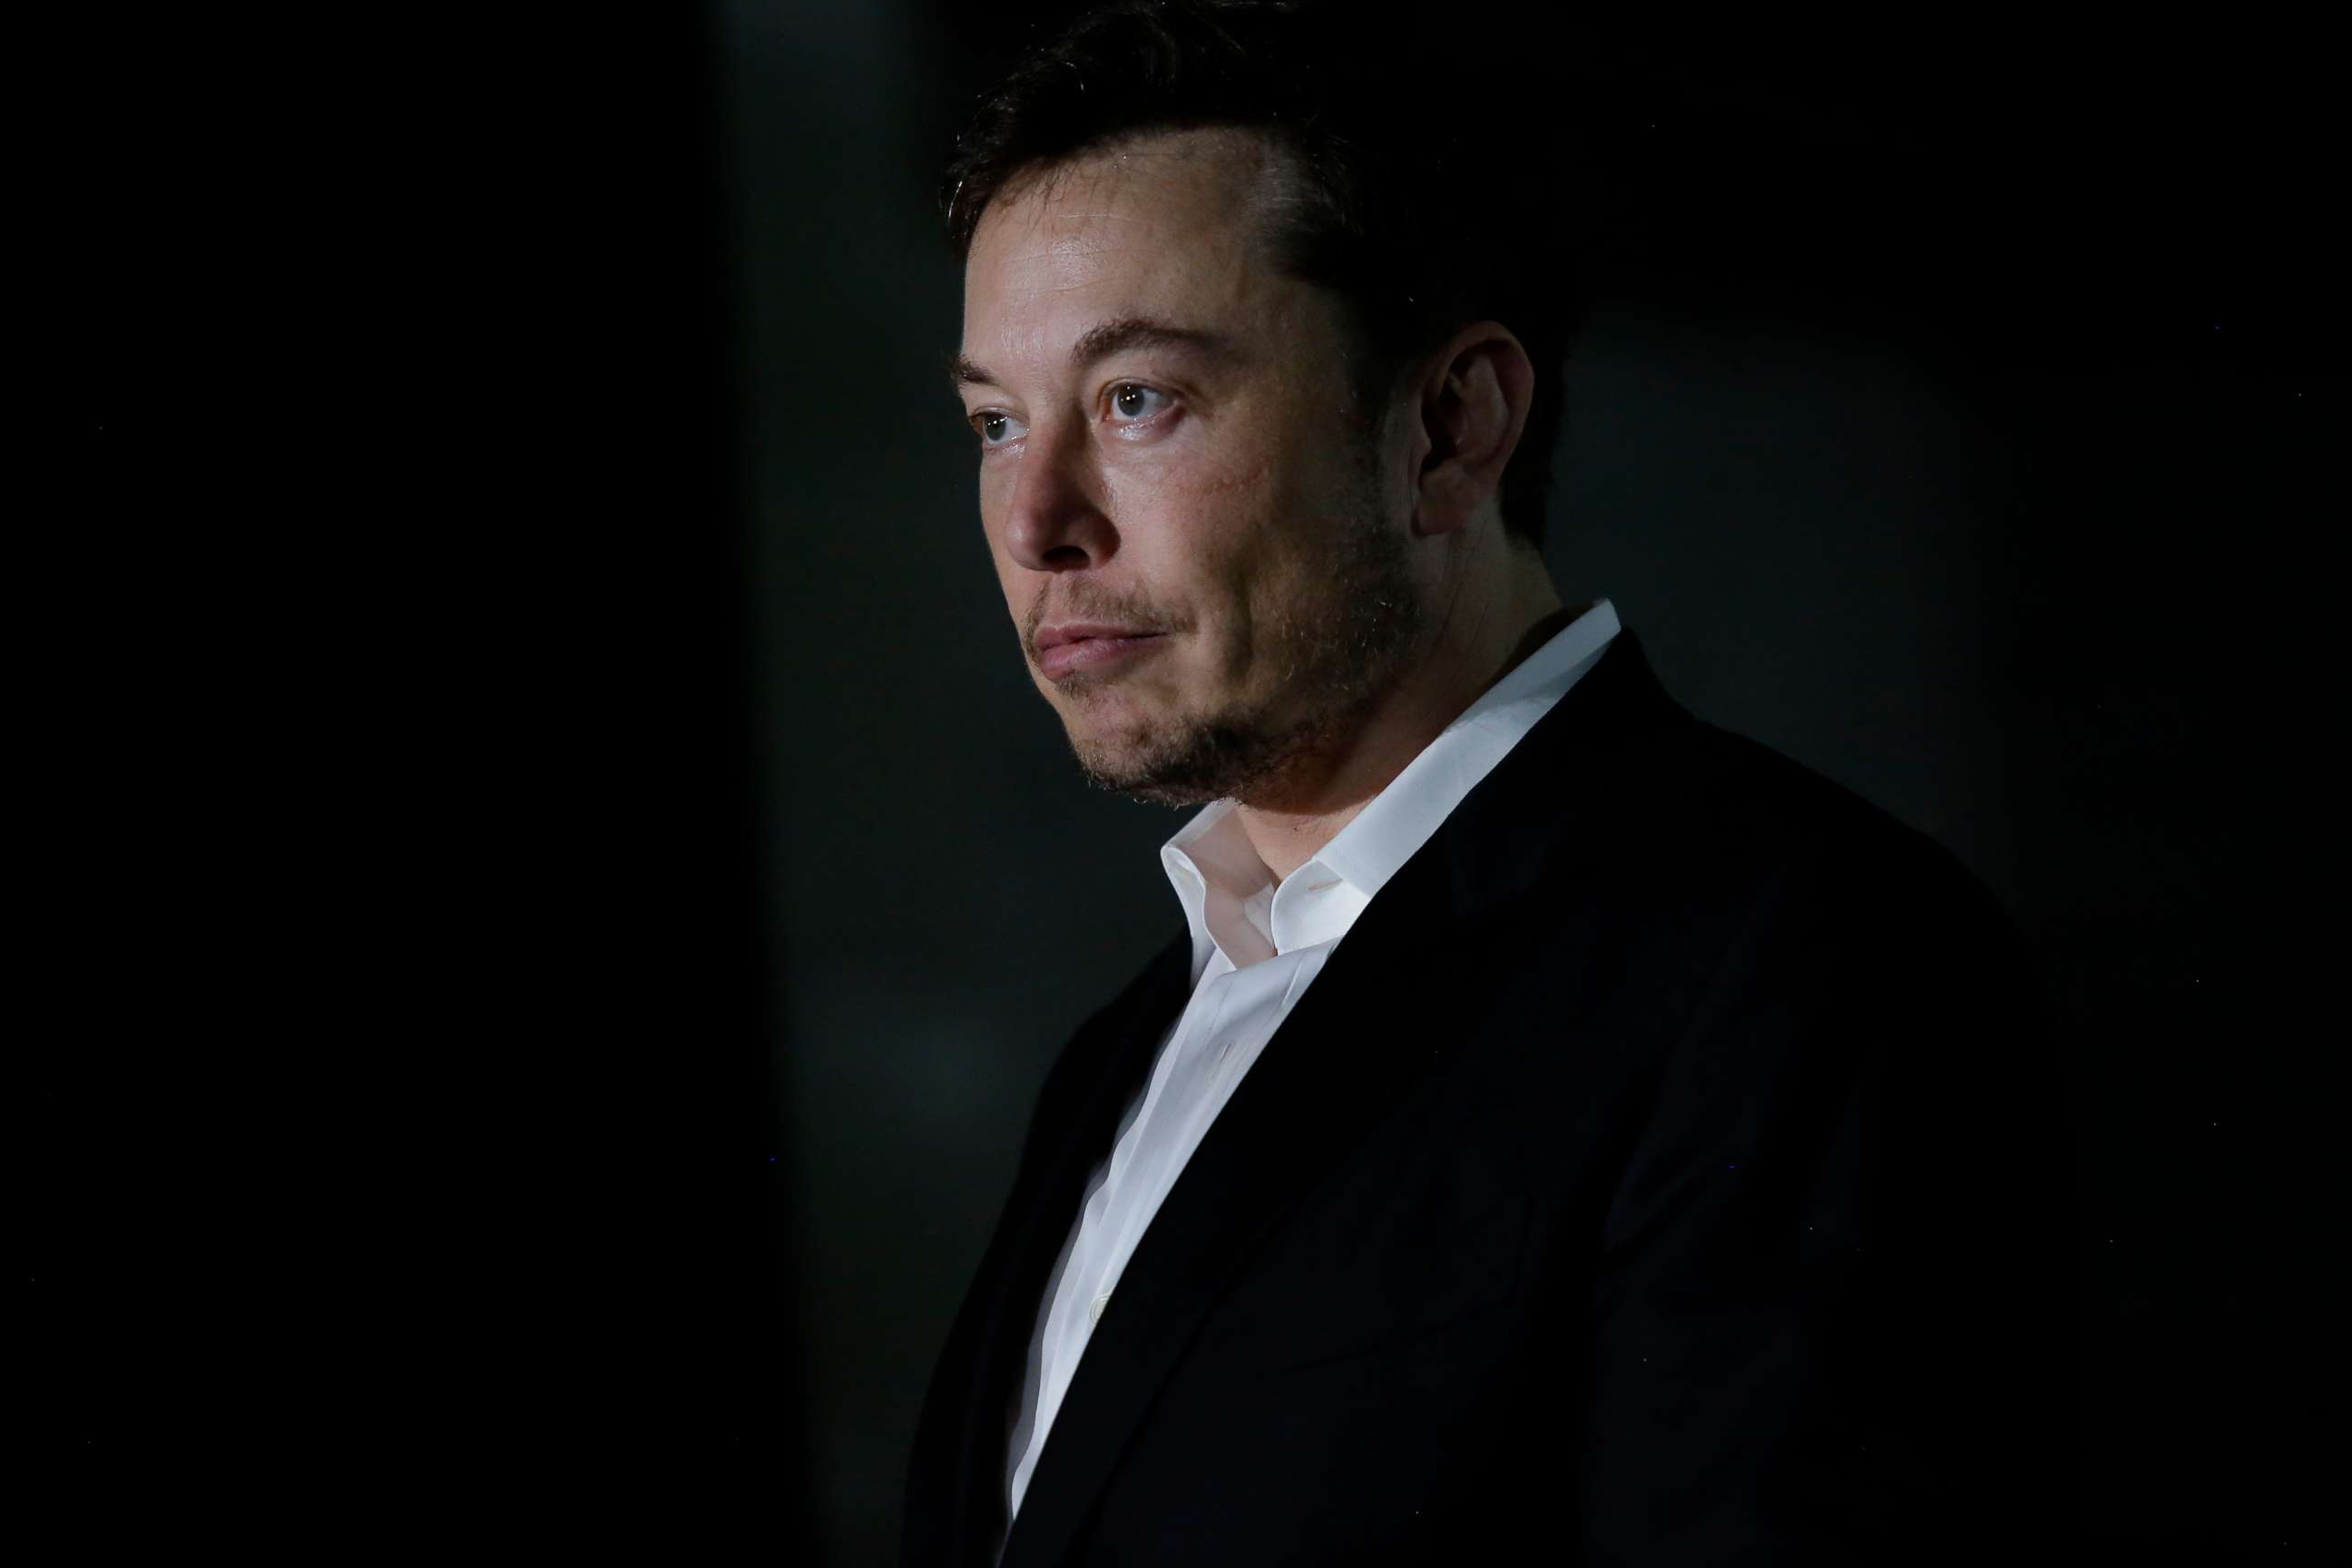 PHOTO: TEngineer and tech entrepreneur Elon Musk of The Boring Company listens as Chicago Mayor Rahm Emanuel talks about constructing a high-speed transit tunnel at Block 37 during a news conference, June 14, 2018, in Chicago.